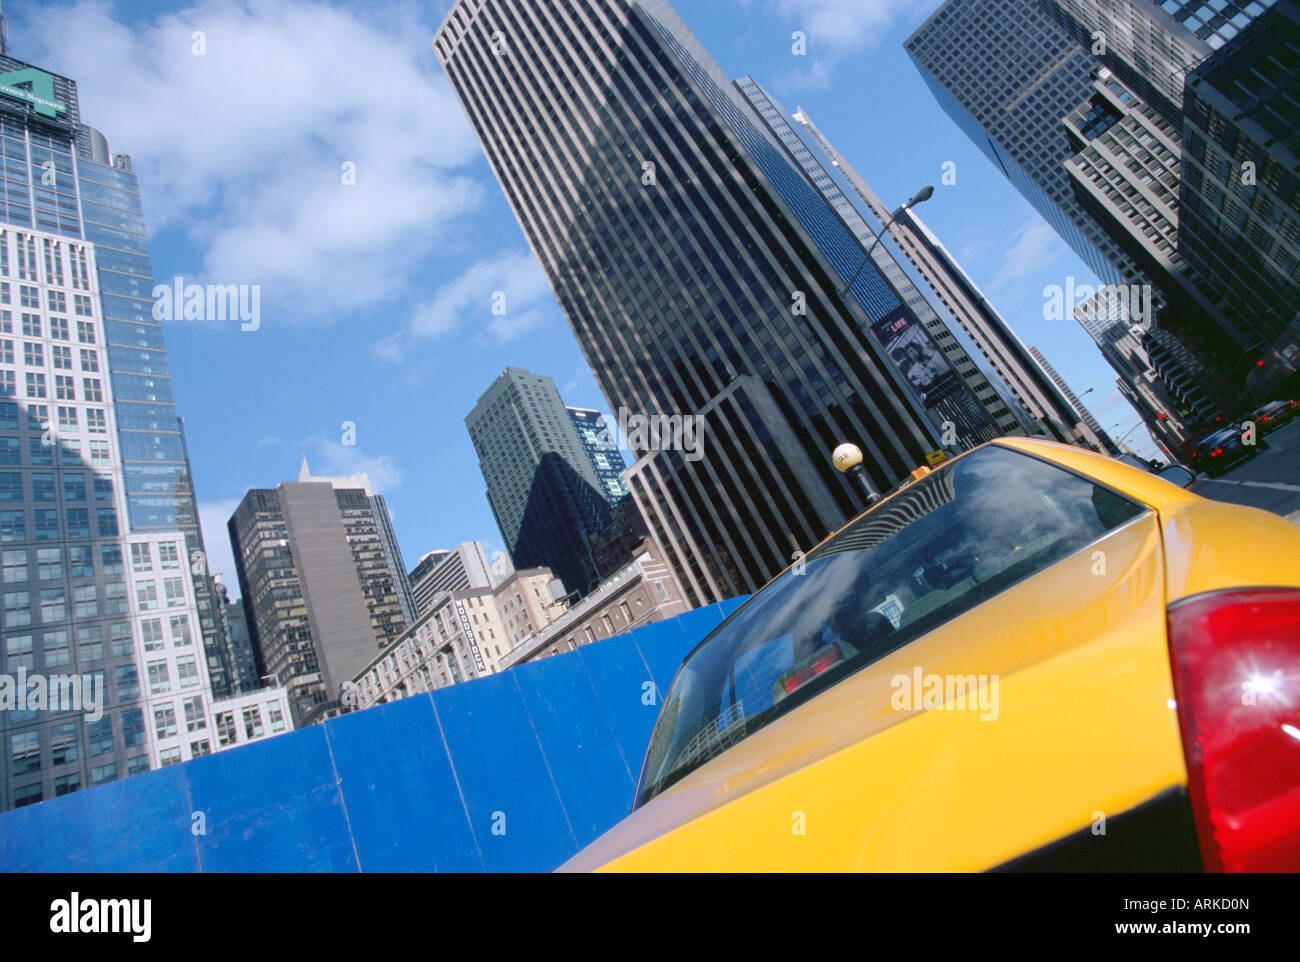 Yellow taxi cab passing blue board with skyscrapers beyond, New York City, New York, USA, North America Stock Photo